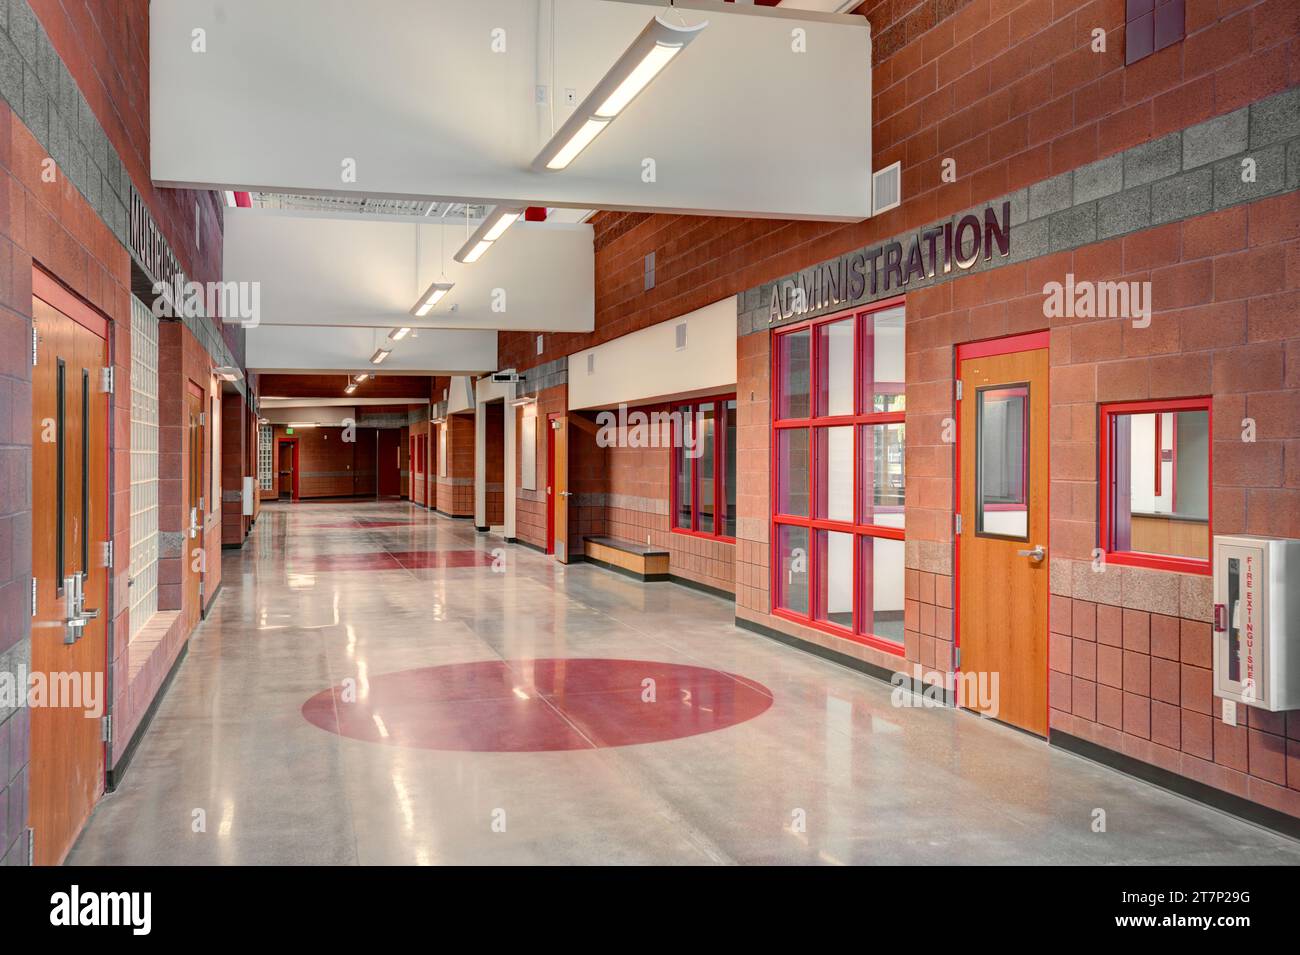 The main hallway in an elementary school, with money saving construction materials, and High efficency computer controlled LED light fixtures. Stock Photo